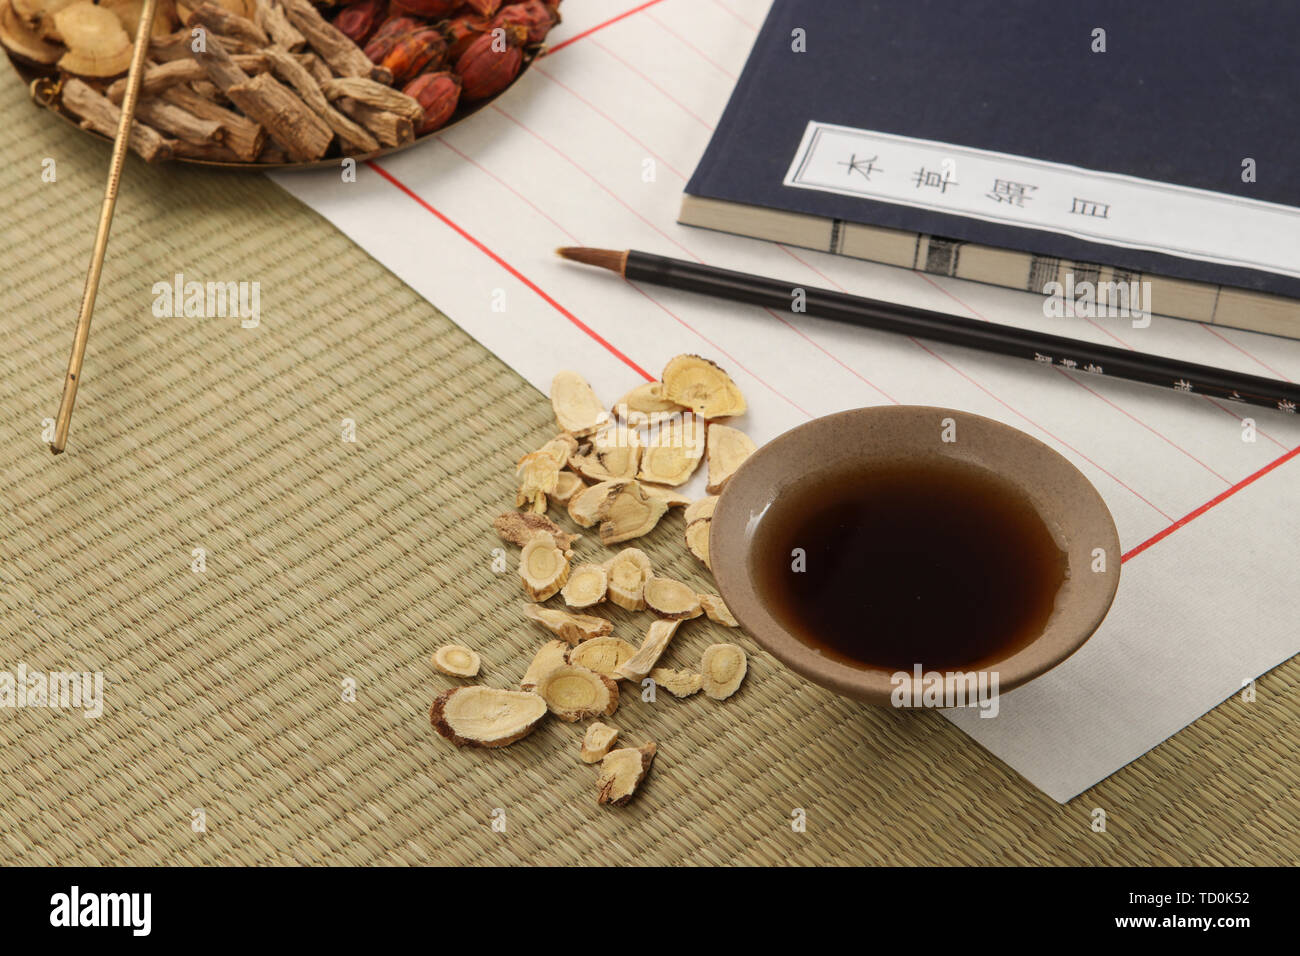 Chinese herbs and prescriptions on the table Stock Photo